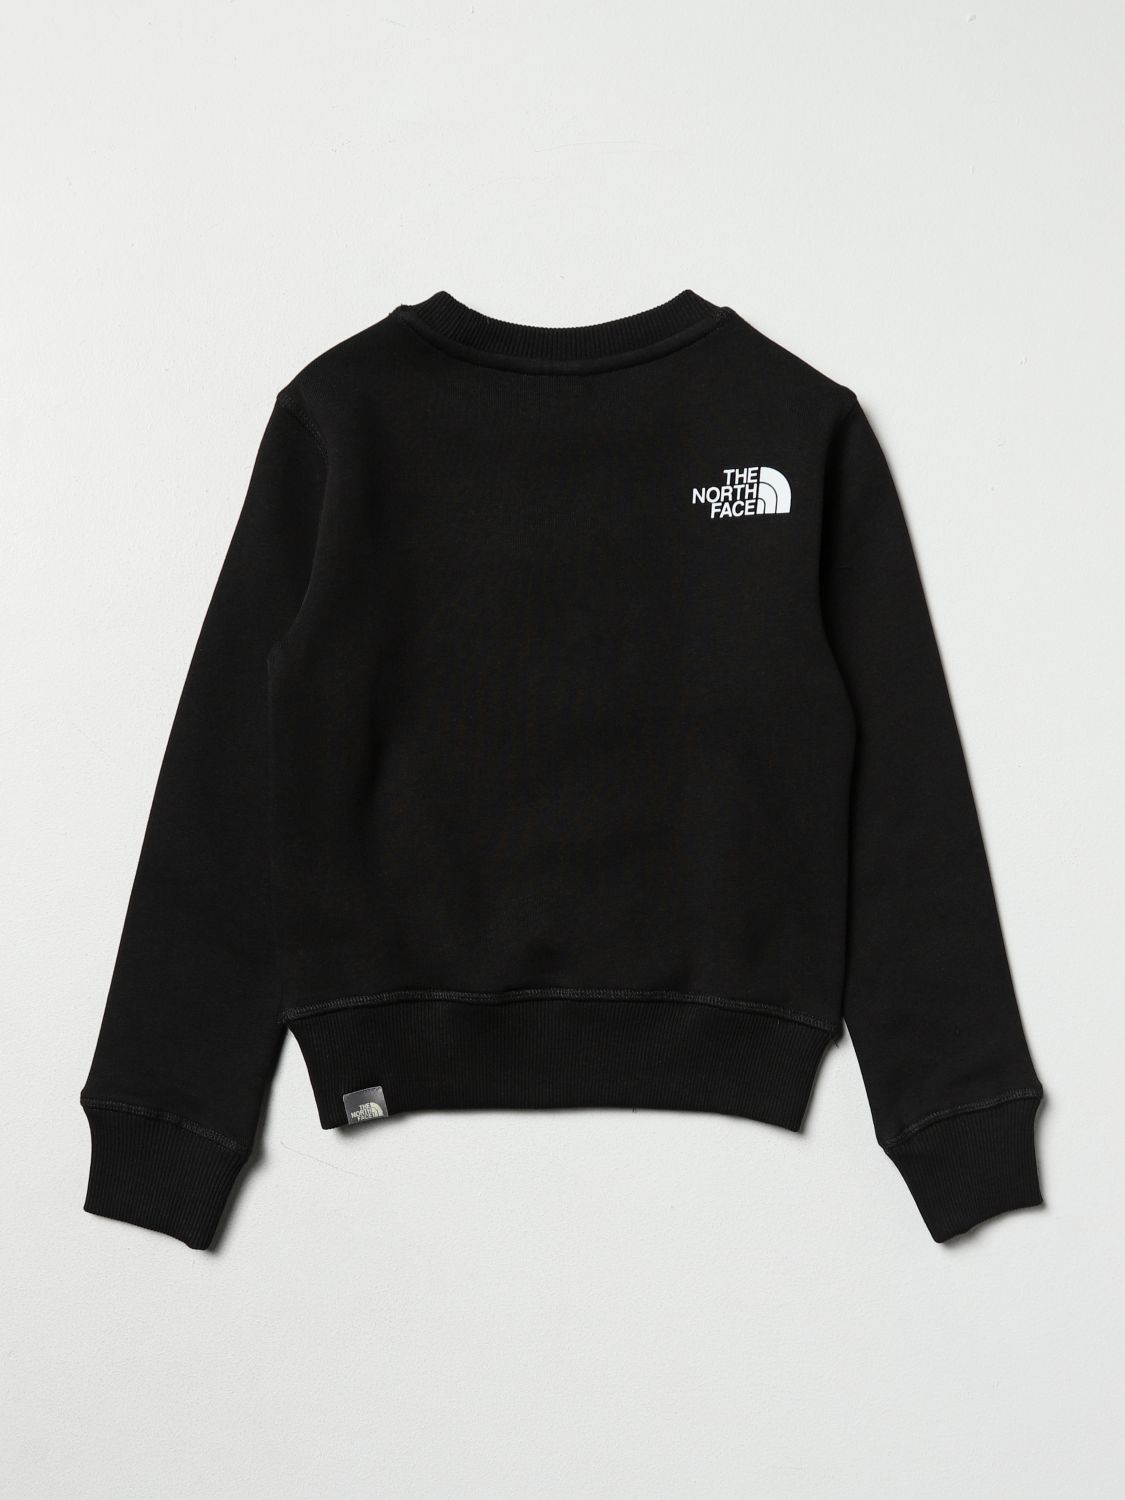 THE NORTH FACE: sweater for boys - Black | The North Face sweater ...